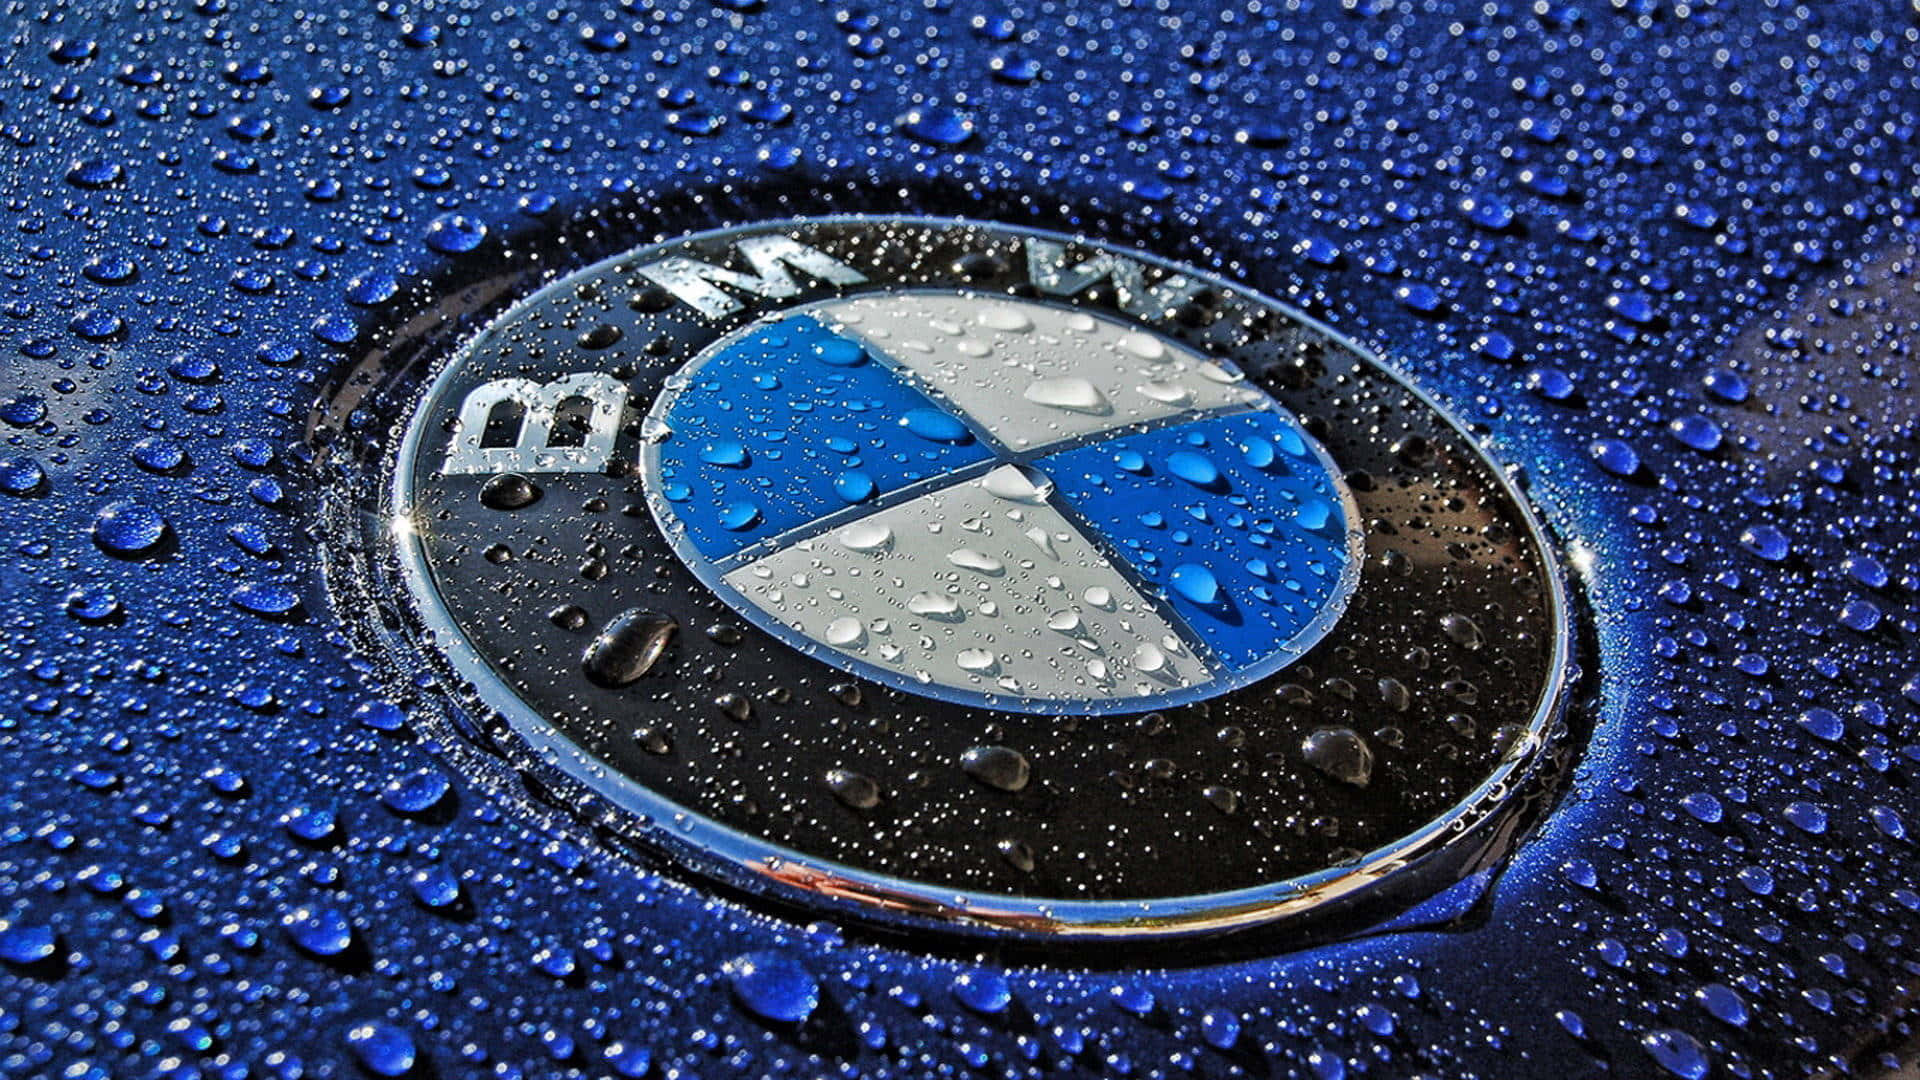 https://wallpapers.com/images/hd/bmw-logo-pictures-img9m0bdvx94o0mt.jpg